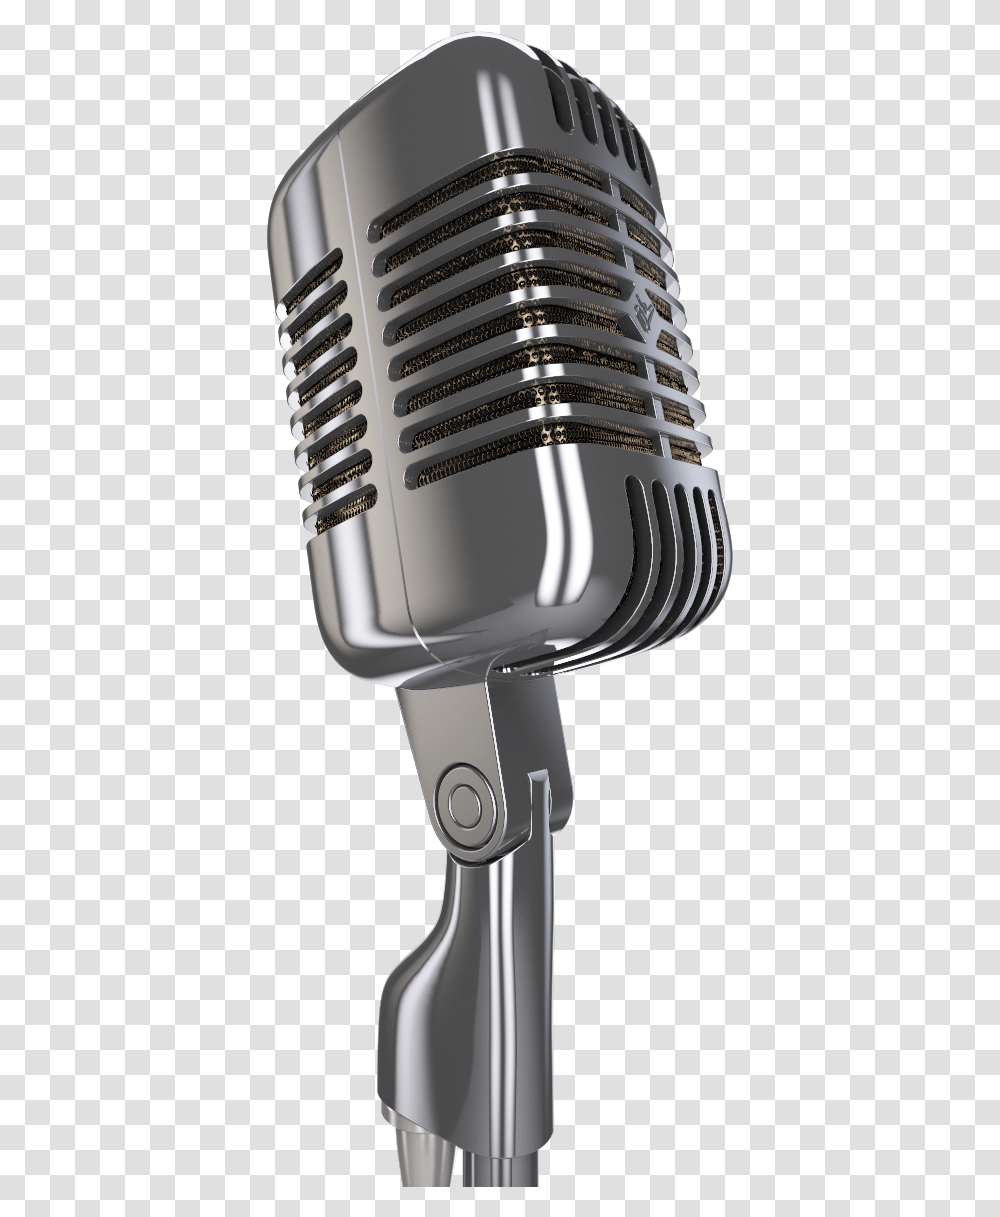 Microfono Vintage Image With No Microfono, Electrical Device, Microphone, Mixer, Appliance Transparent Png